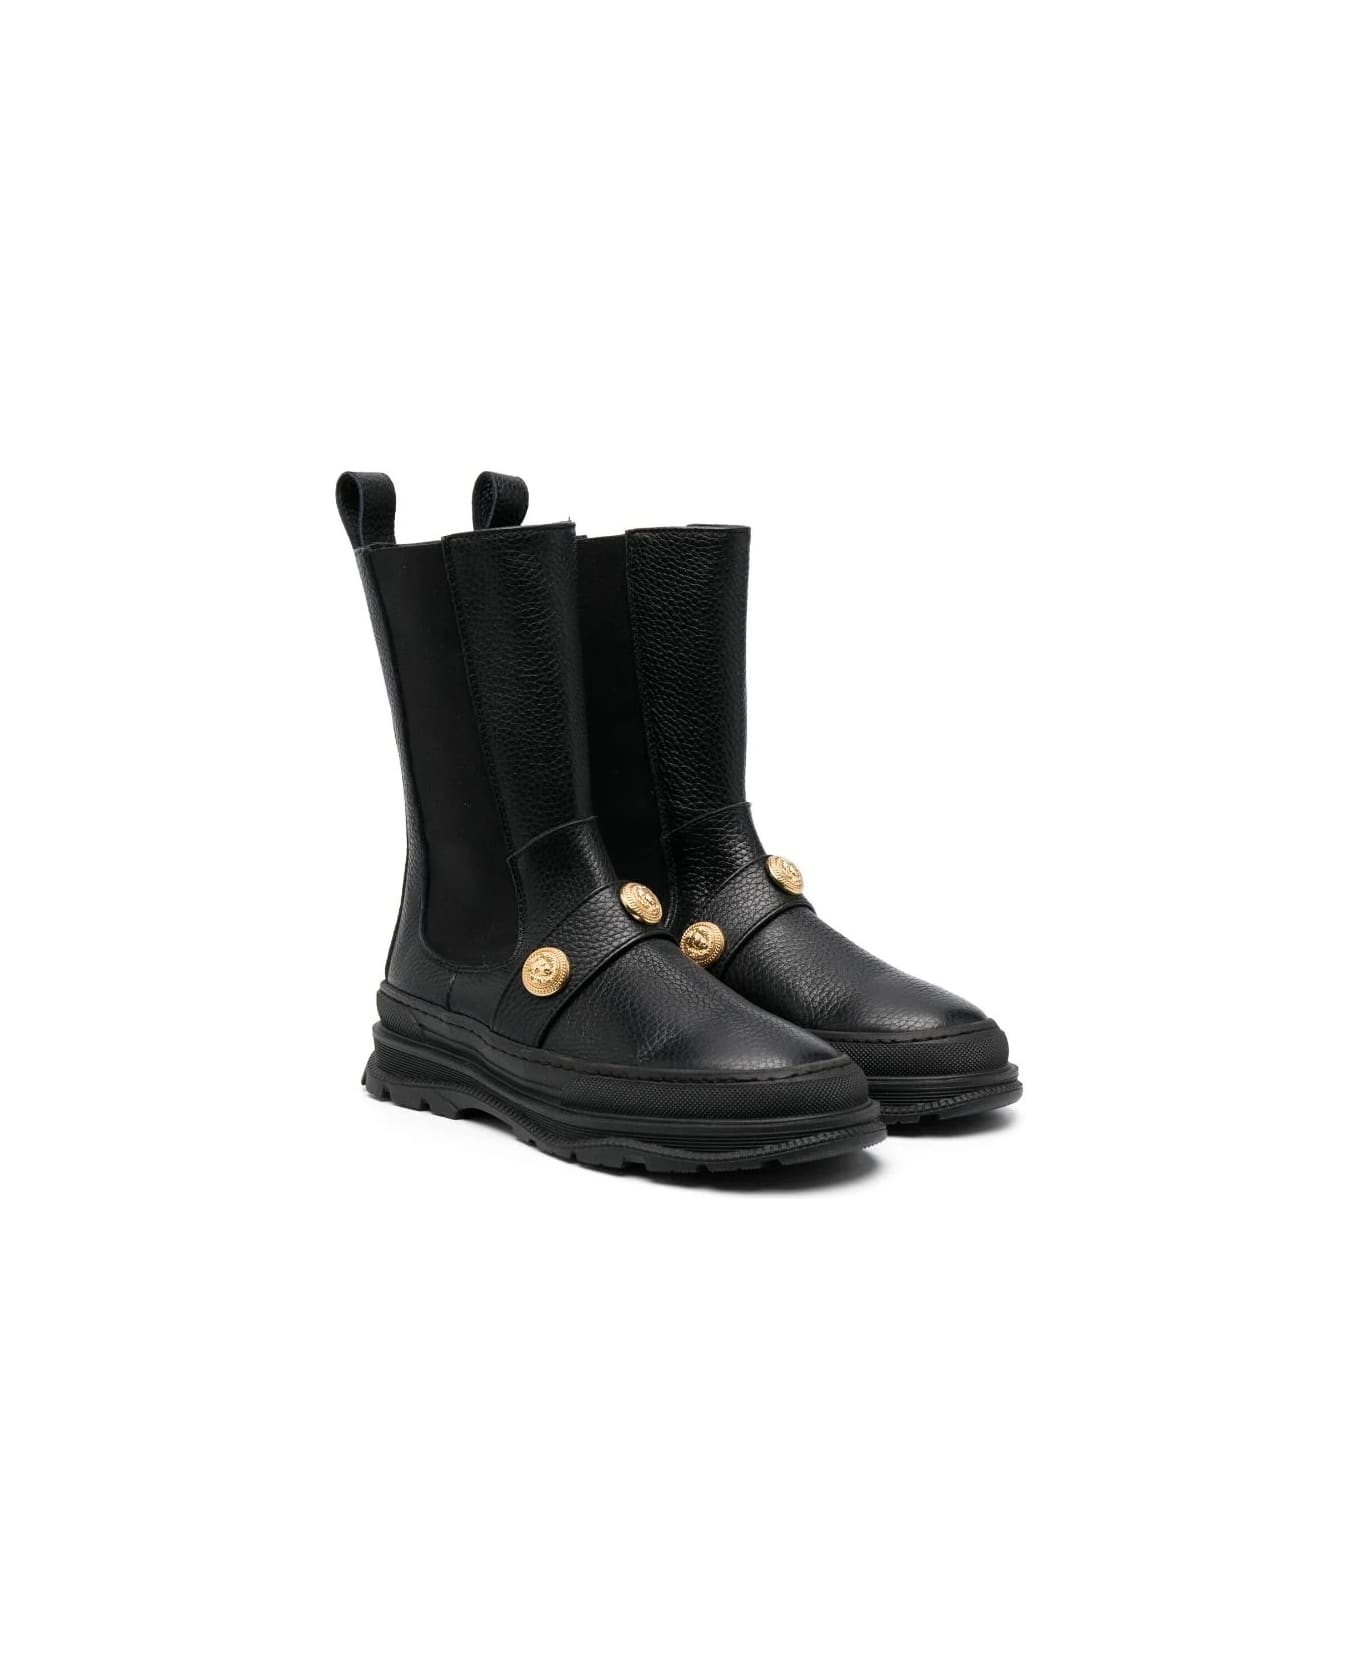 Balmain Black Boots With Gold Embossed Buttons - Or シューズ